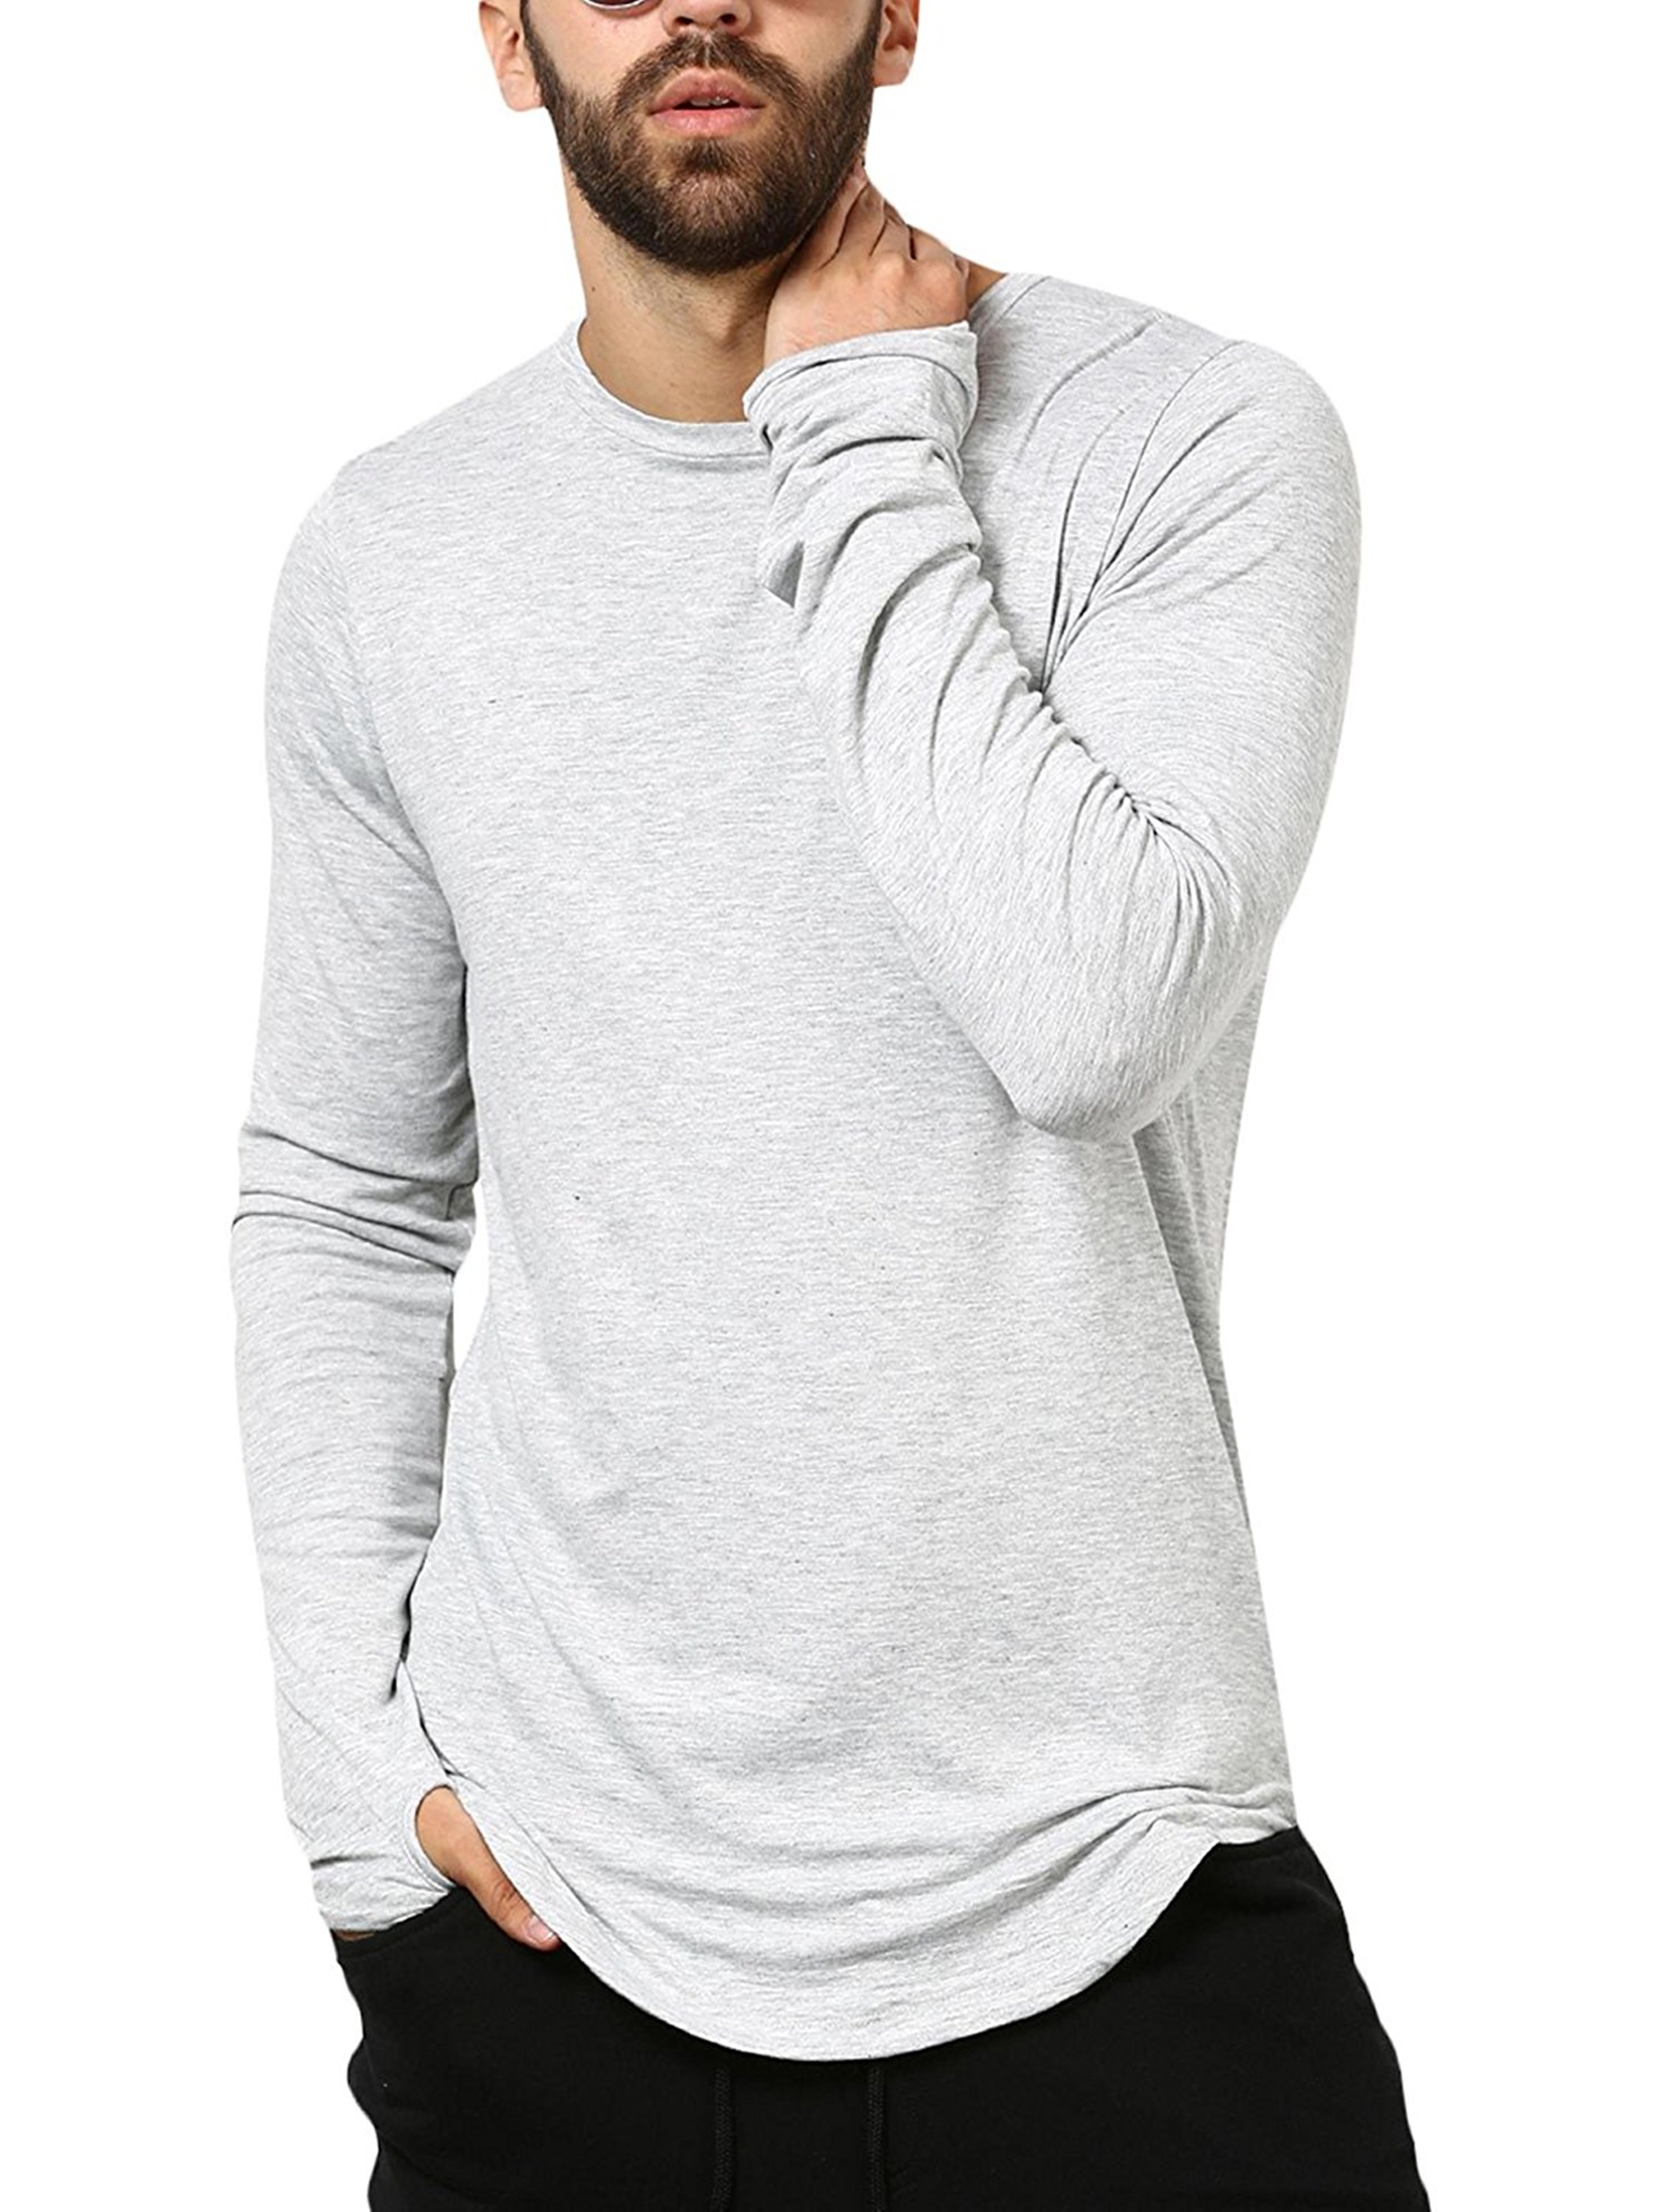 Buy PAUSE Black Solid Cotton Round Neck Slim Fit Long Sleeve Men's T ...